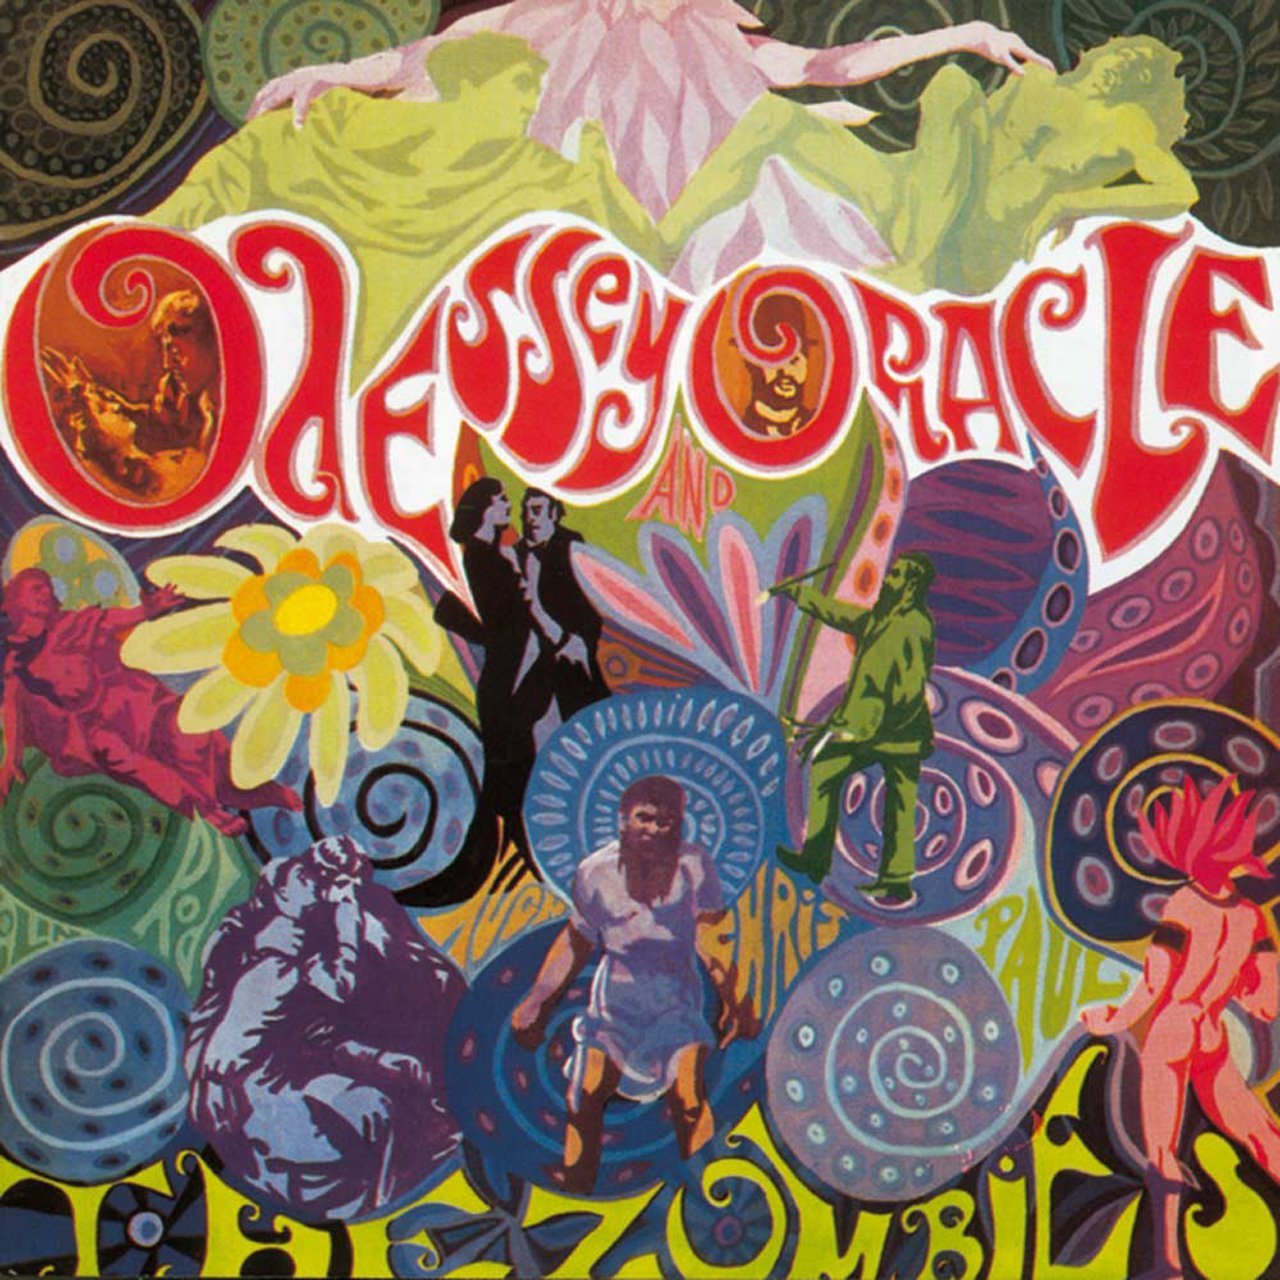 Art for Time of the Seasons by The Zombies